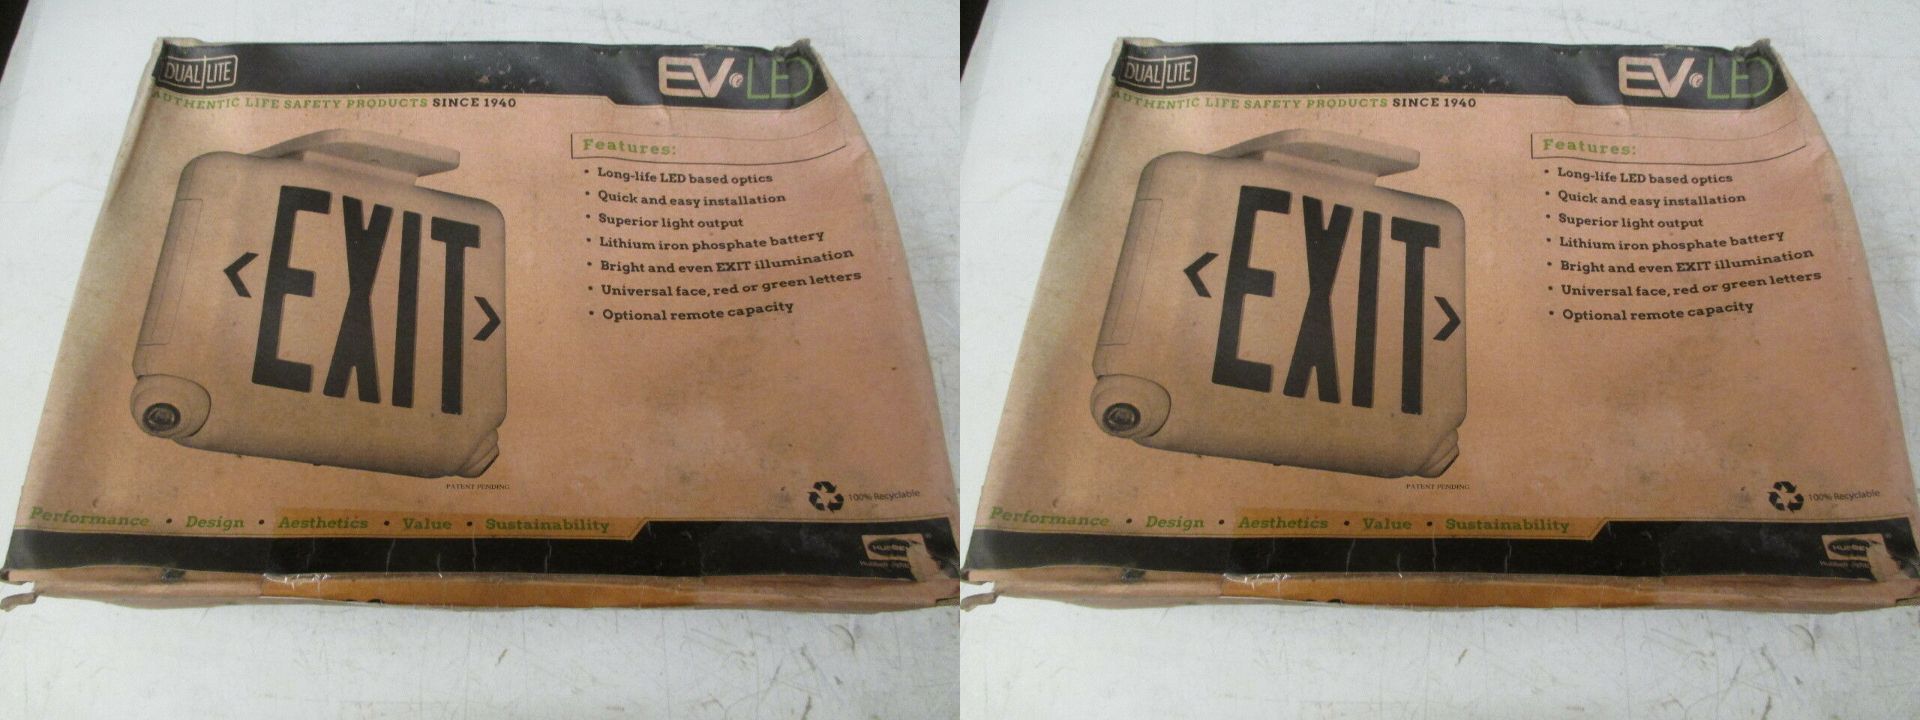 DUAL-LITE EVCURWDI-0-WM Exit Sign P/N 93060027, Lot of 2, New Old Stock